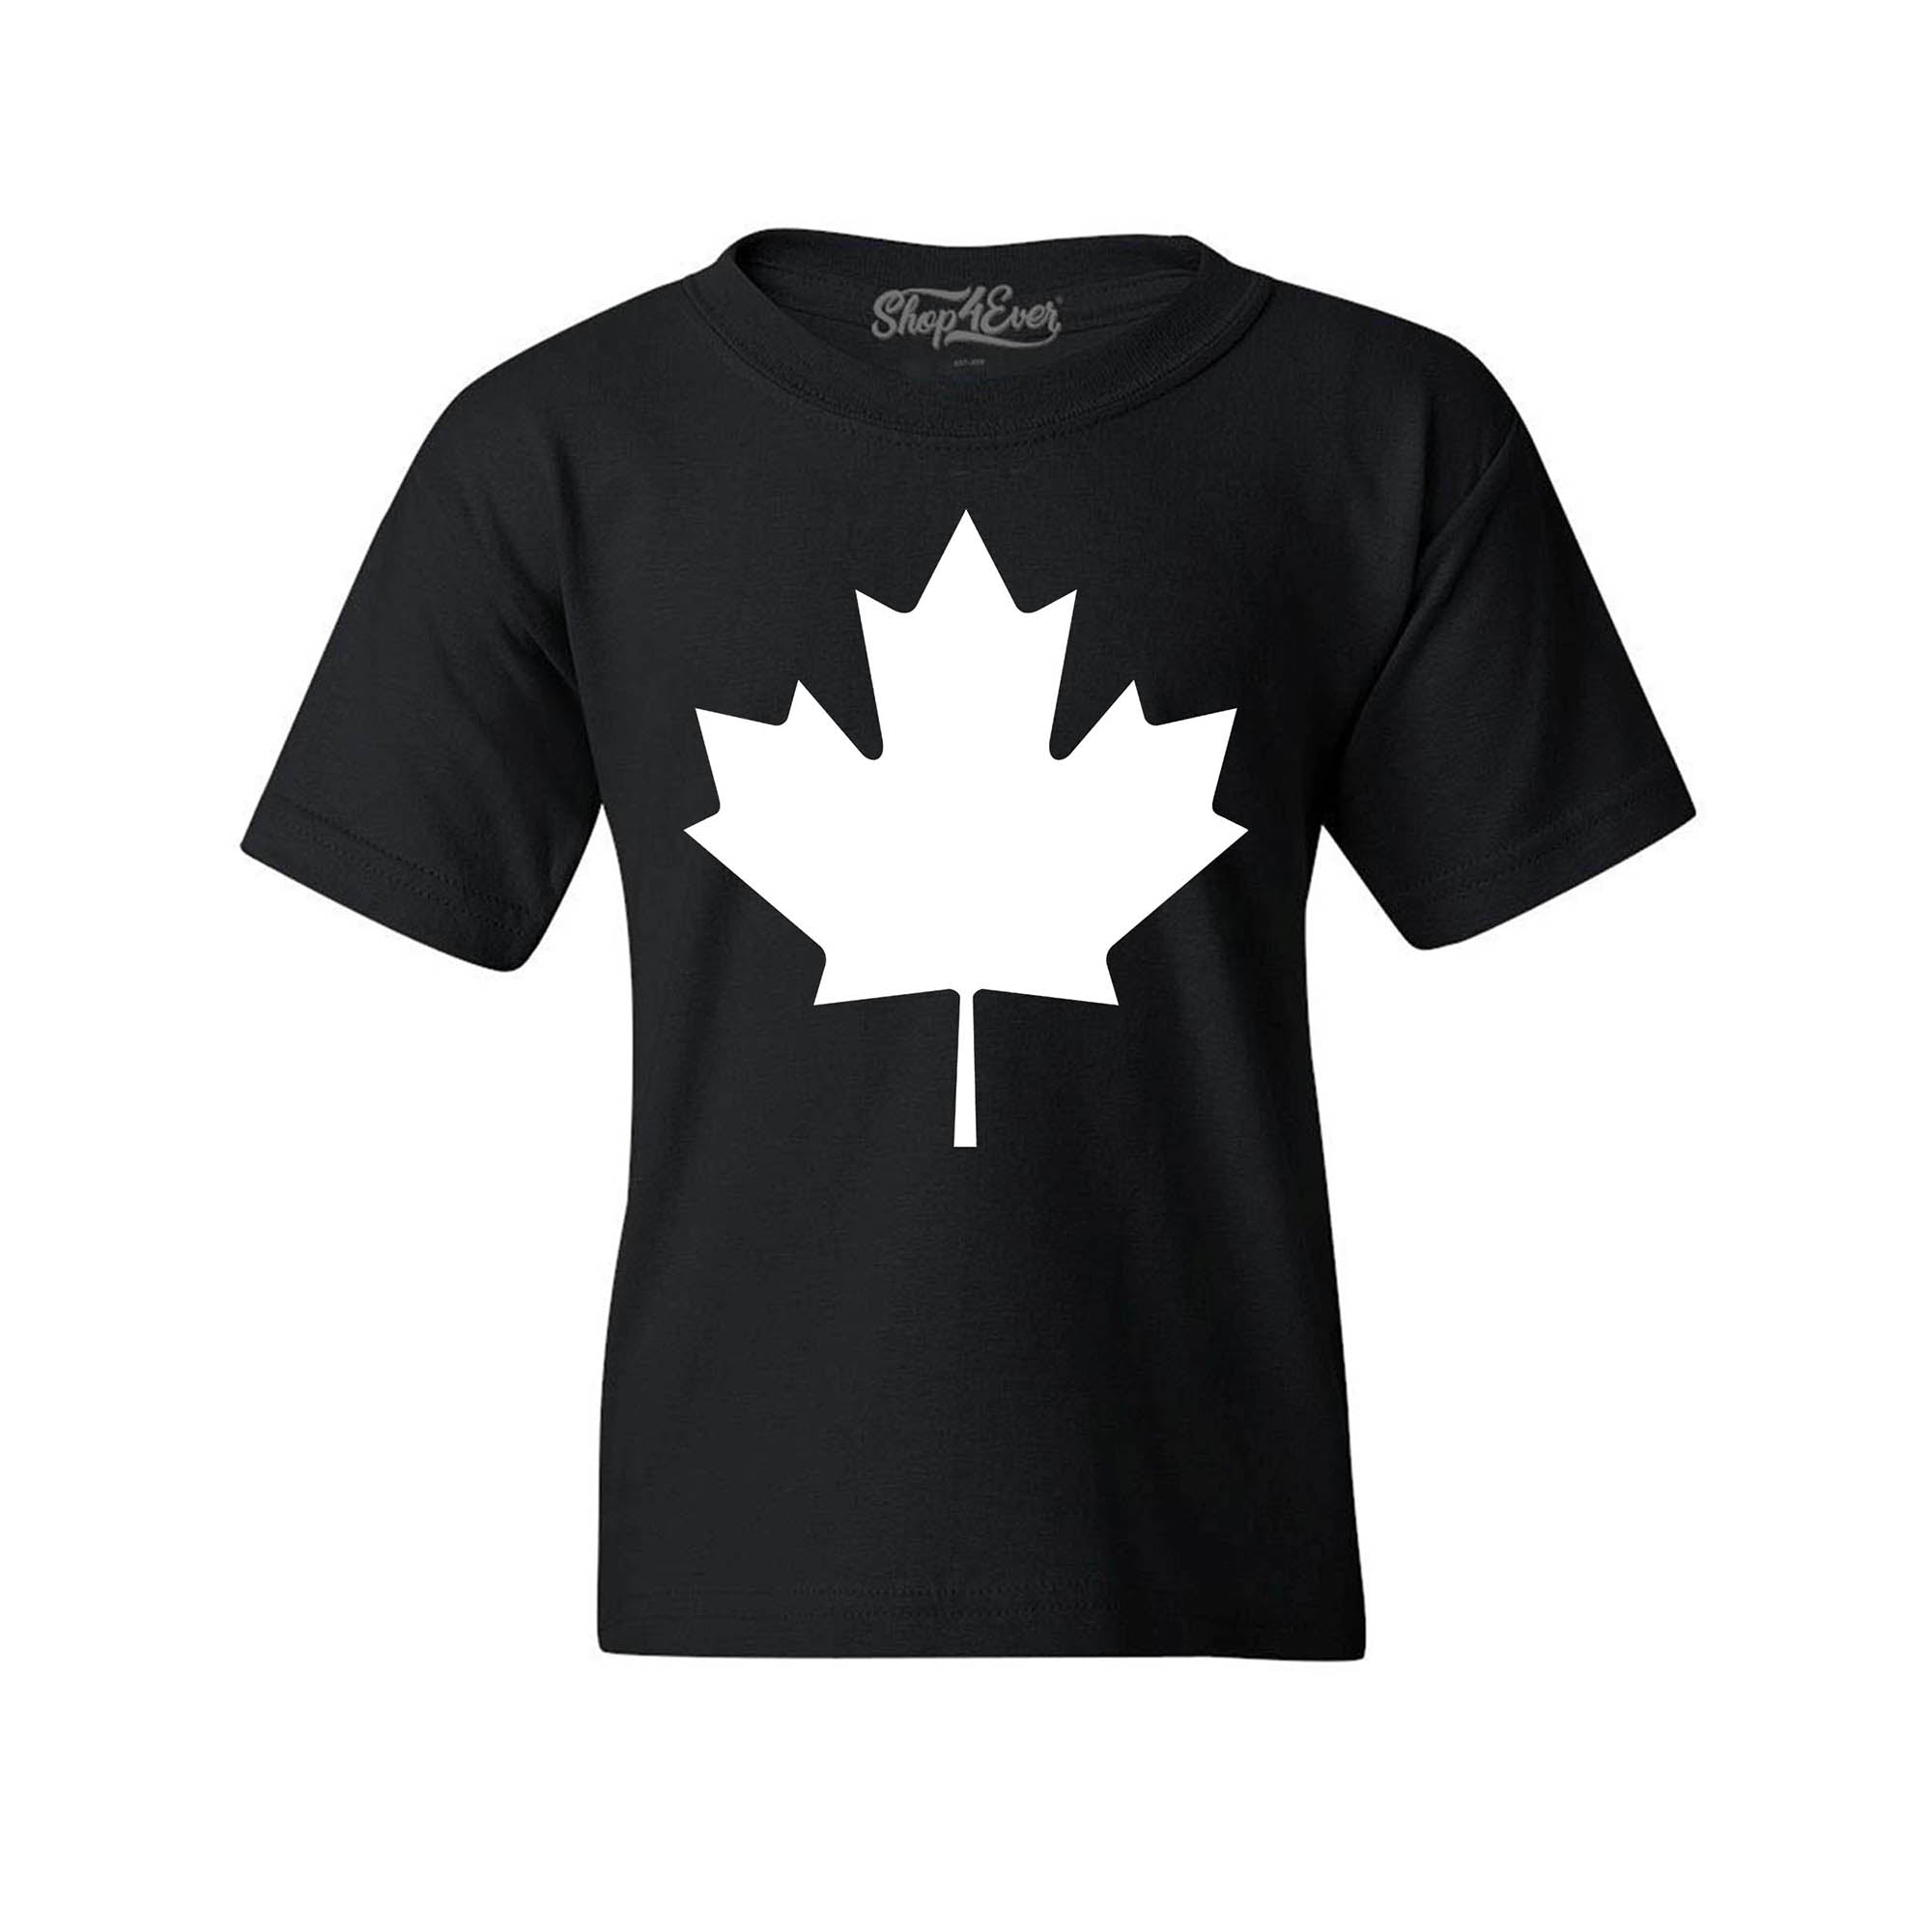 Canada White Maple Leaf Youth's T-Shirt Canadian Child Kids Tee